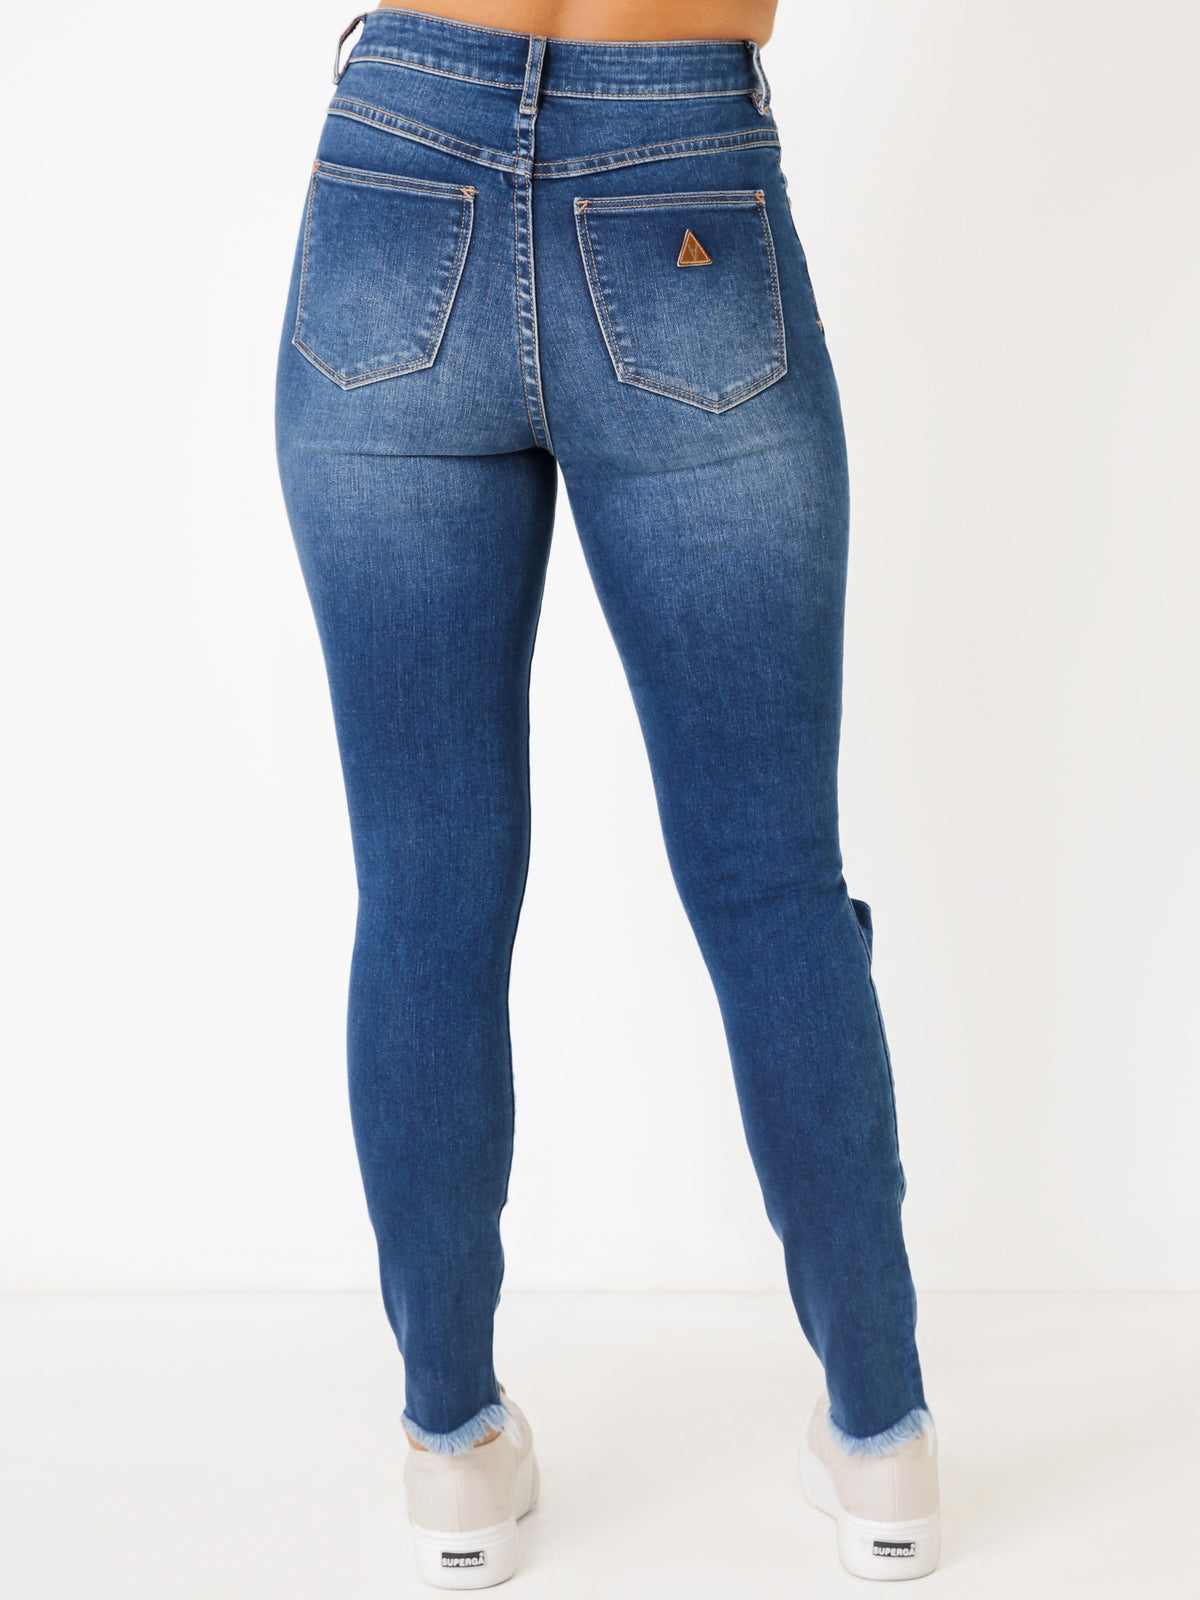 A High Skinny Ankle Basher Jean in Mid Summer Blue Denim